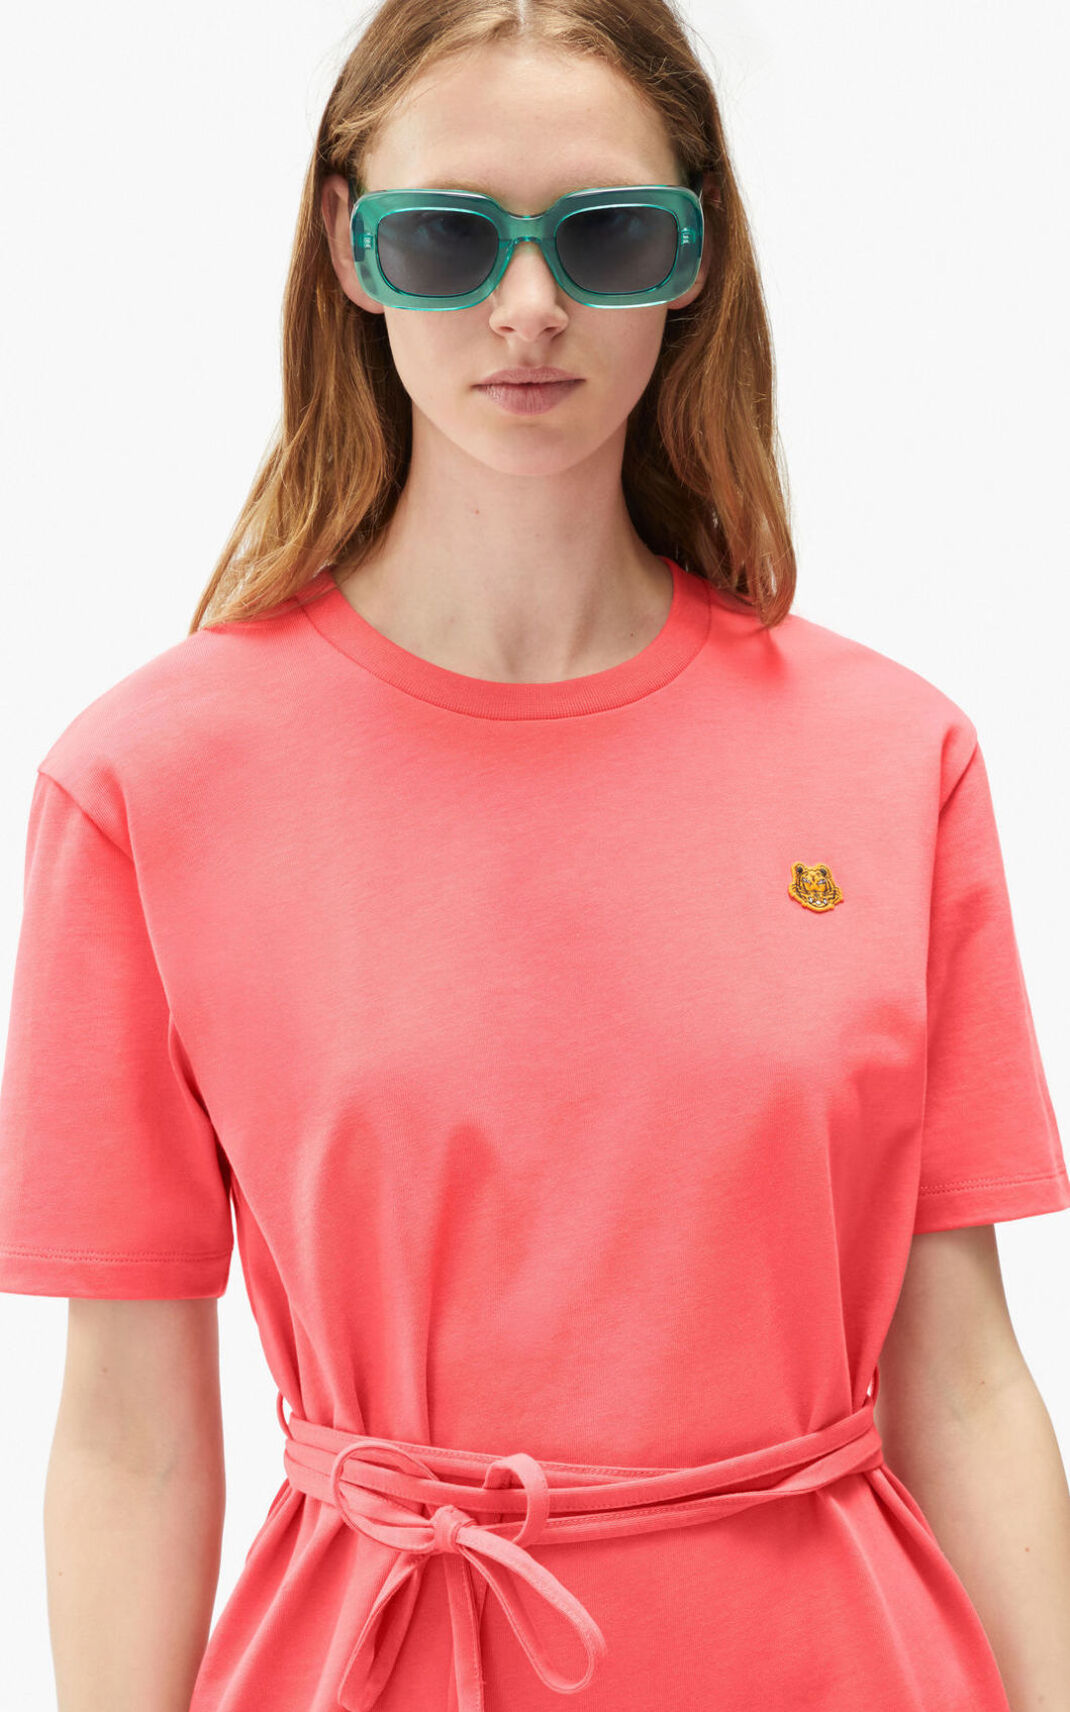 Kenzo Tiger Crest T shirt Dress Coral For Womens 1403KNYEP